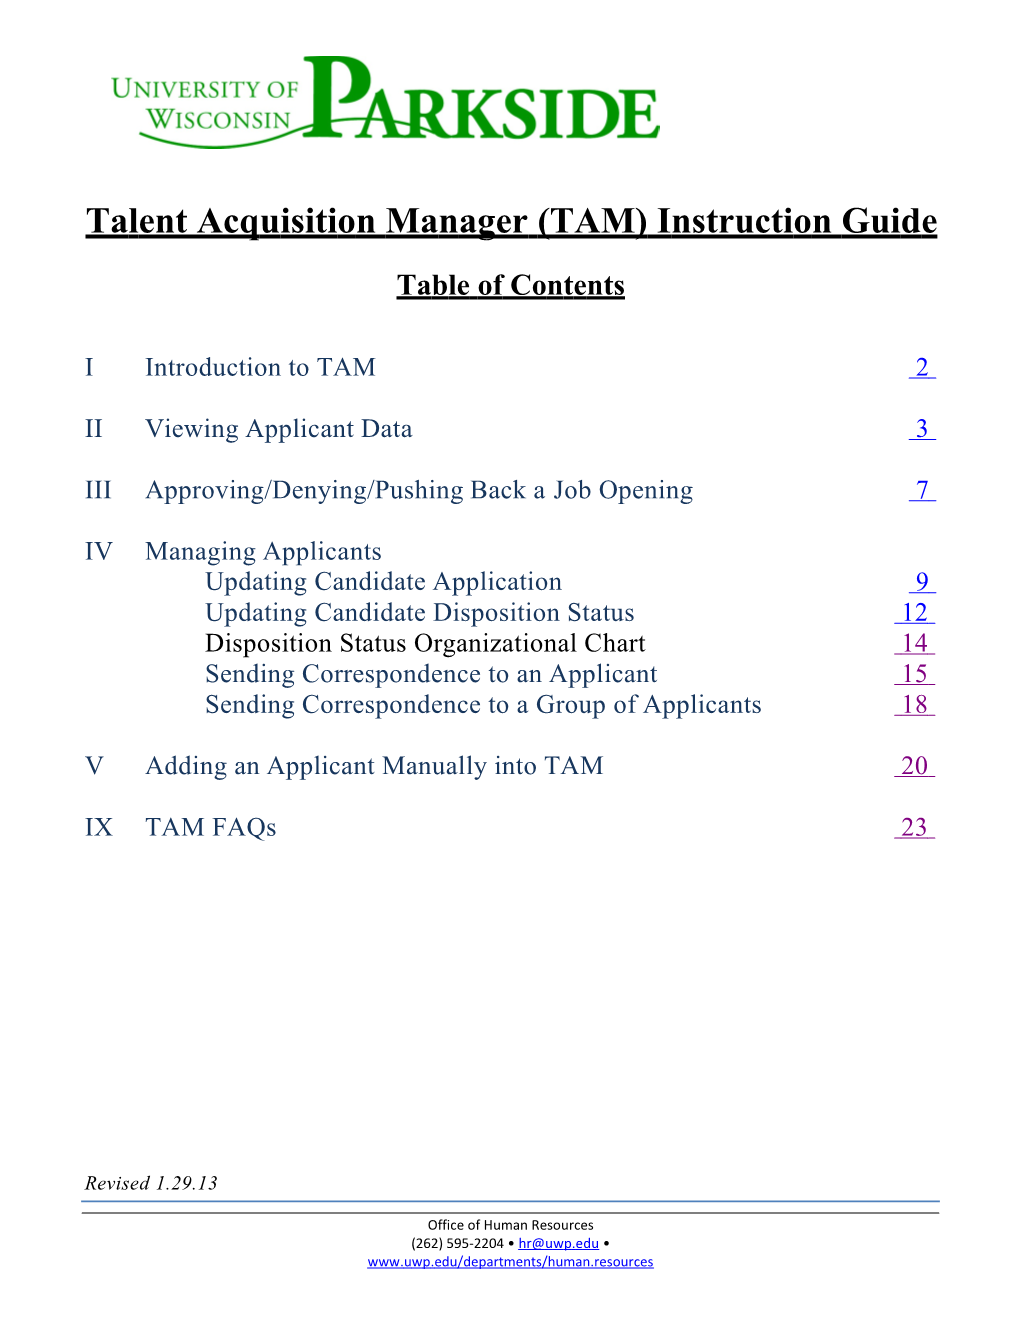 Talent Acquisition Manager(TAM) Instruction Guide